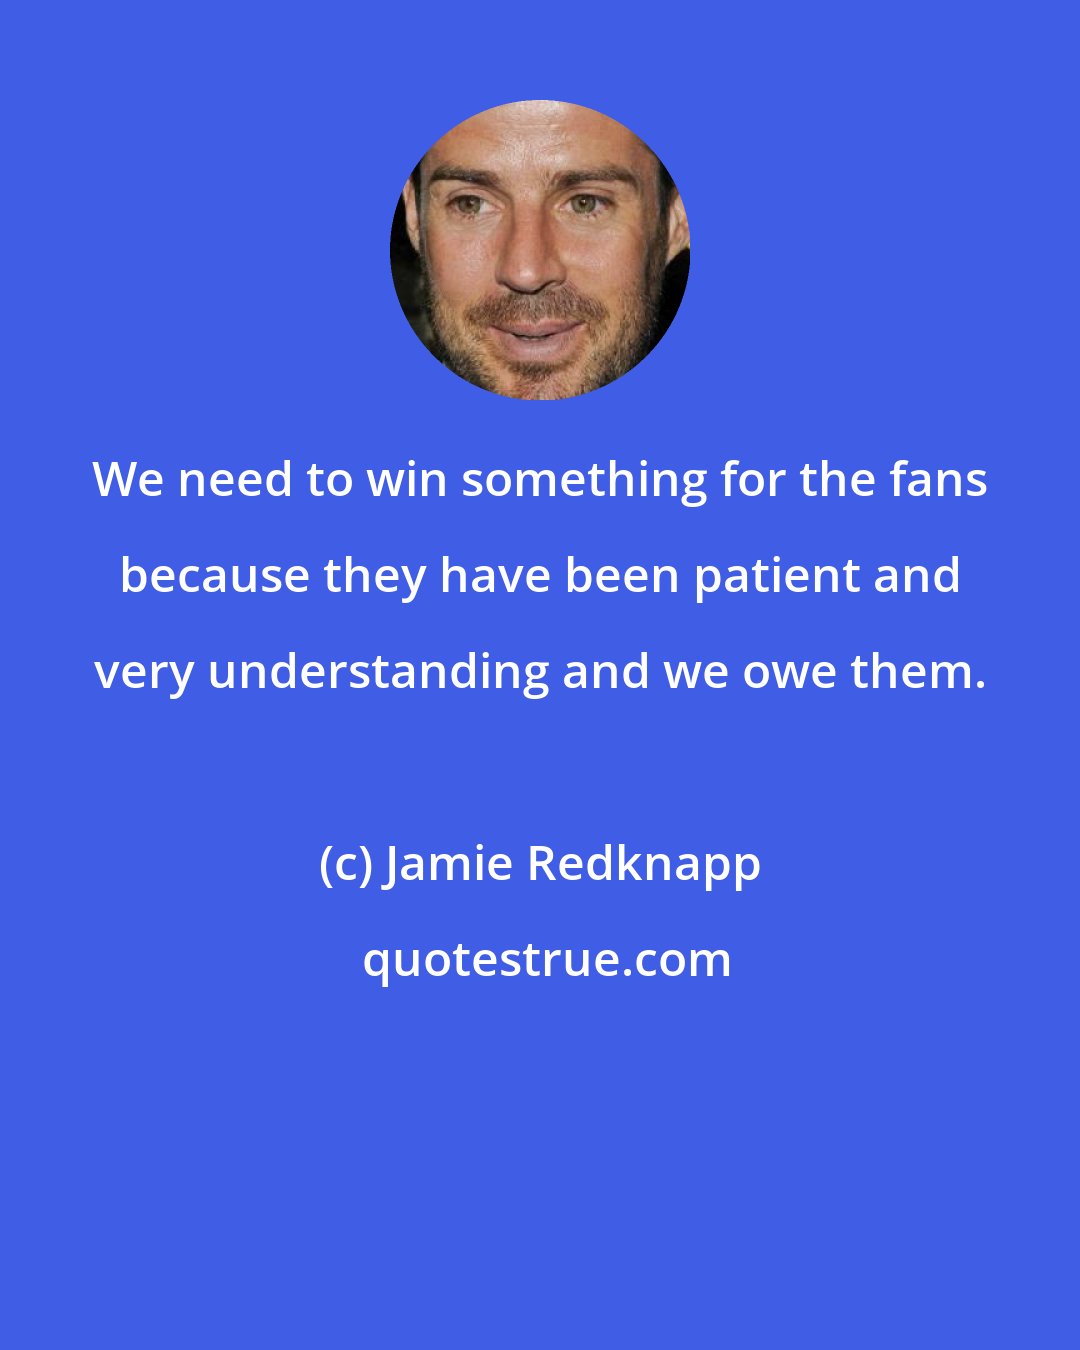 Jamie Redknapp: We need to win something for the fans because they have been patient and very understanding and we owe them.